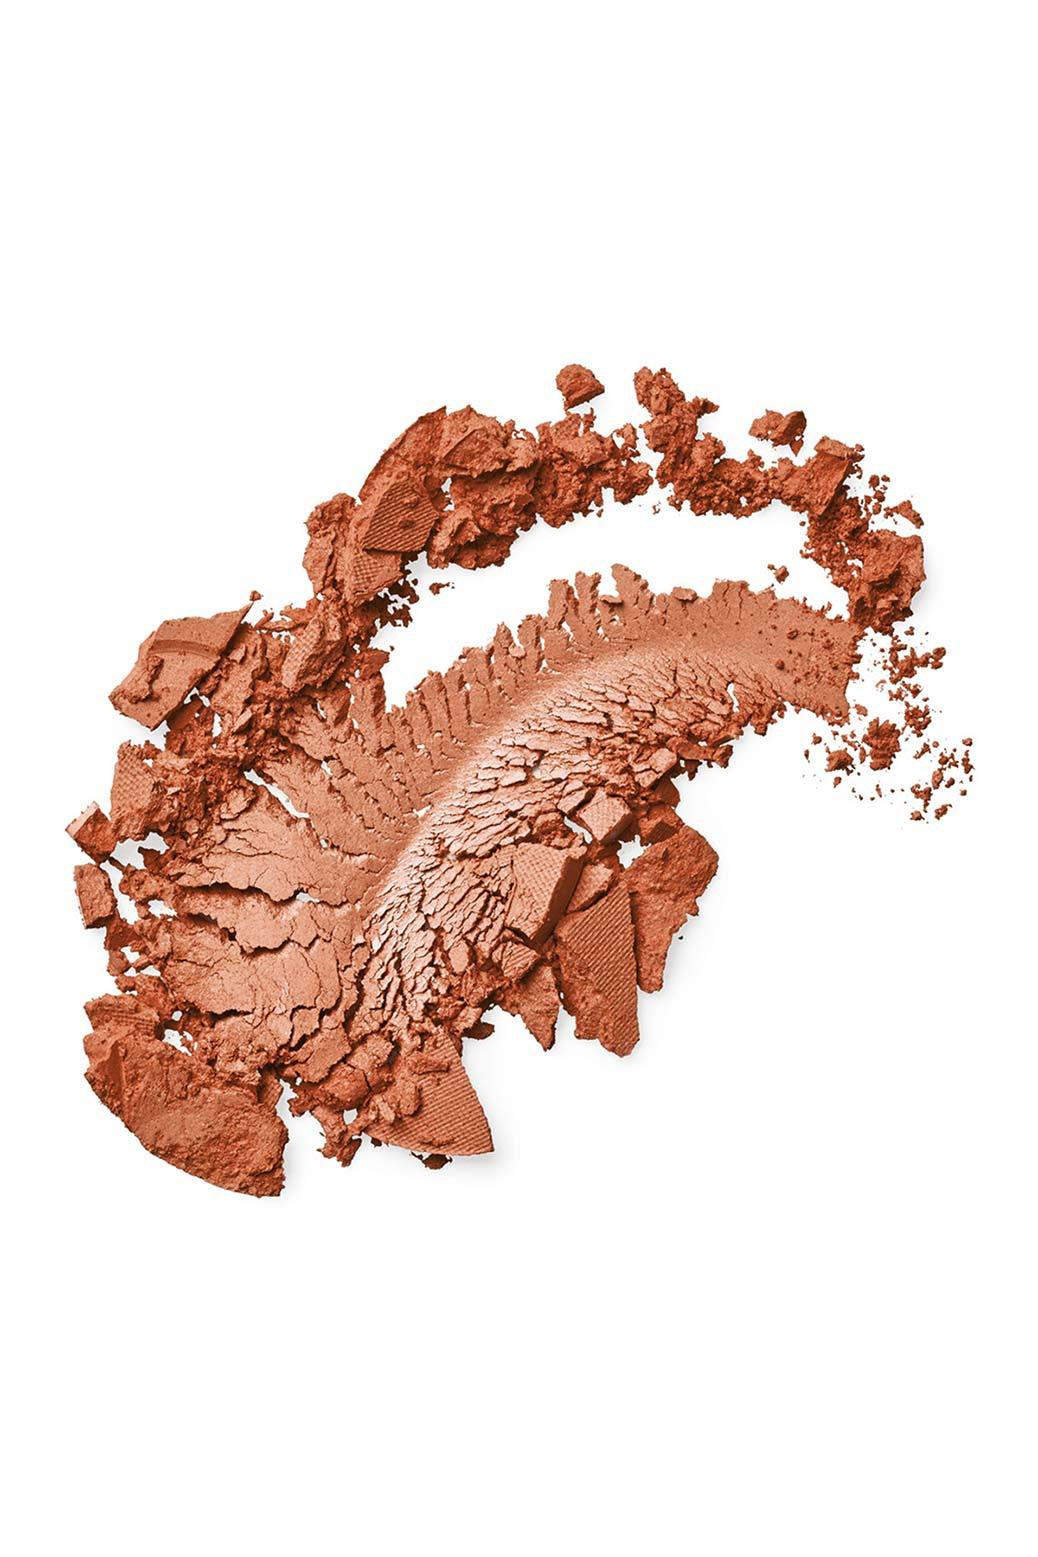 BAKED CHOICE RICH TOUCH BLUSH-ON (3 SHADES)